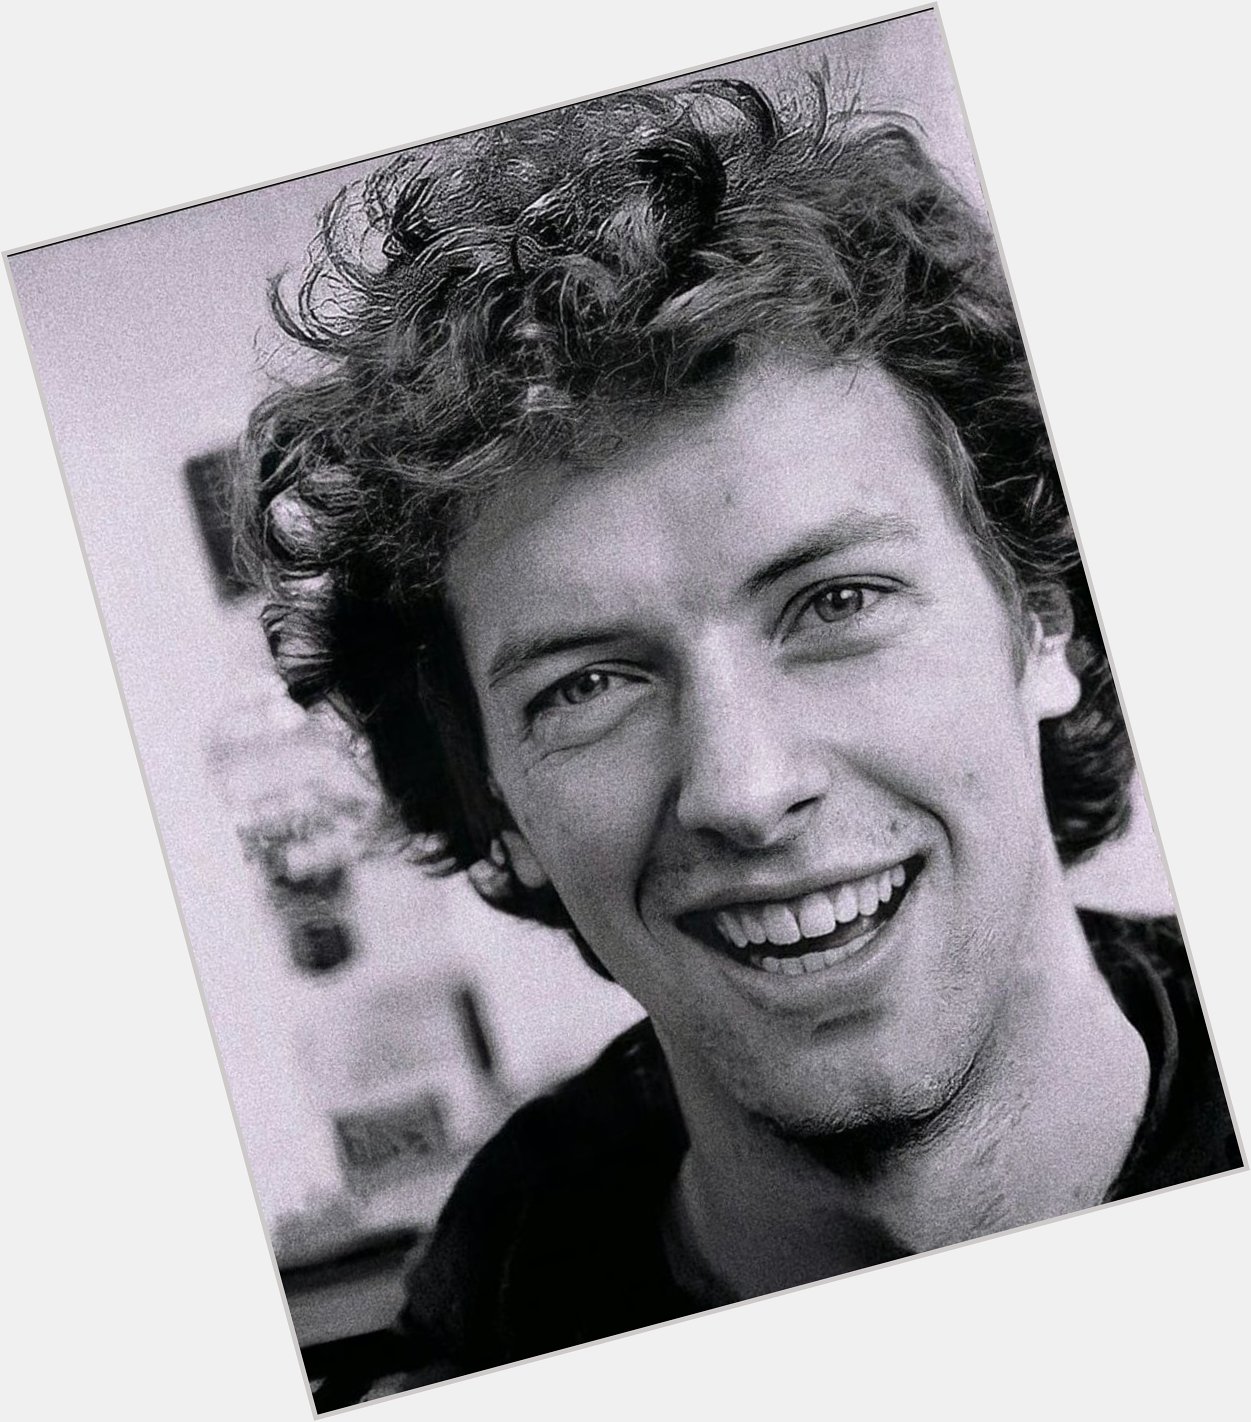 Happy Birthday to my favourite singer, writer and person of all time Chris Martin!   